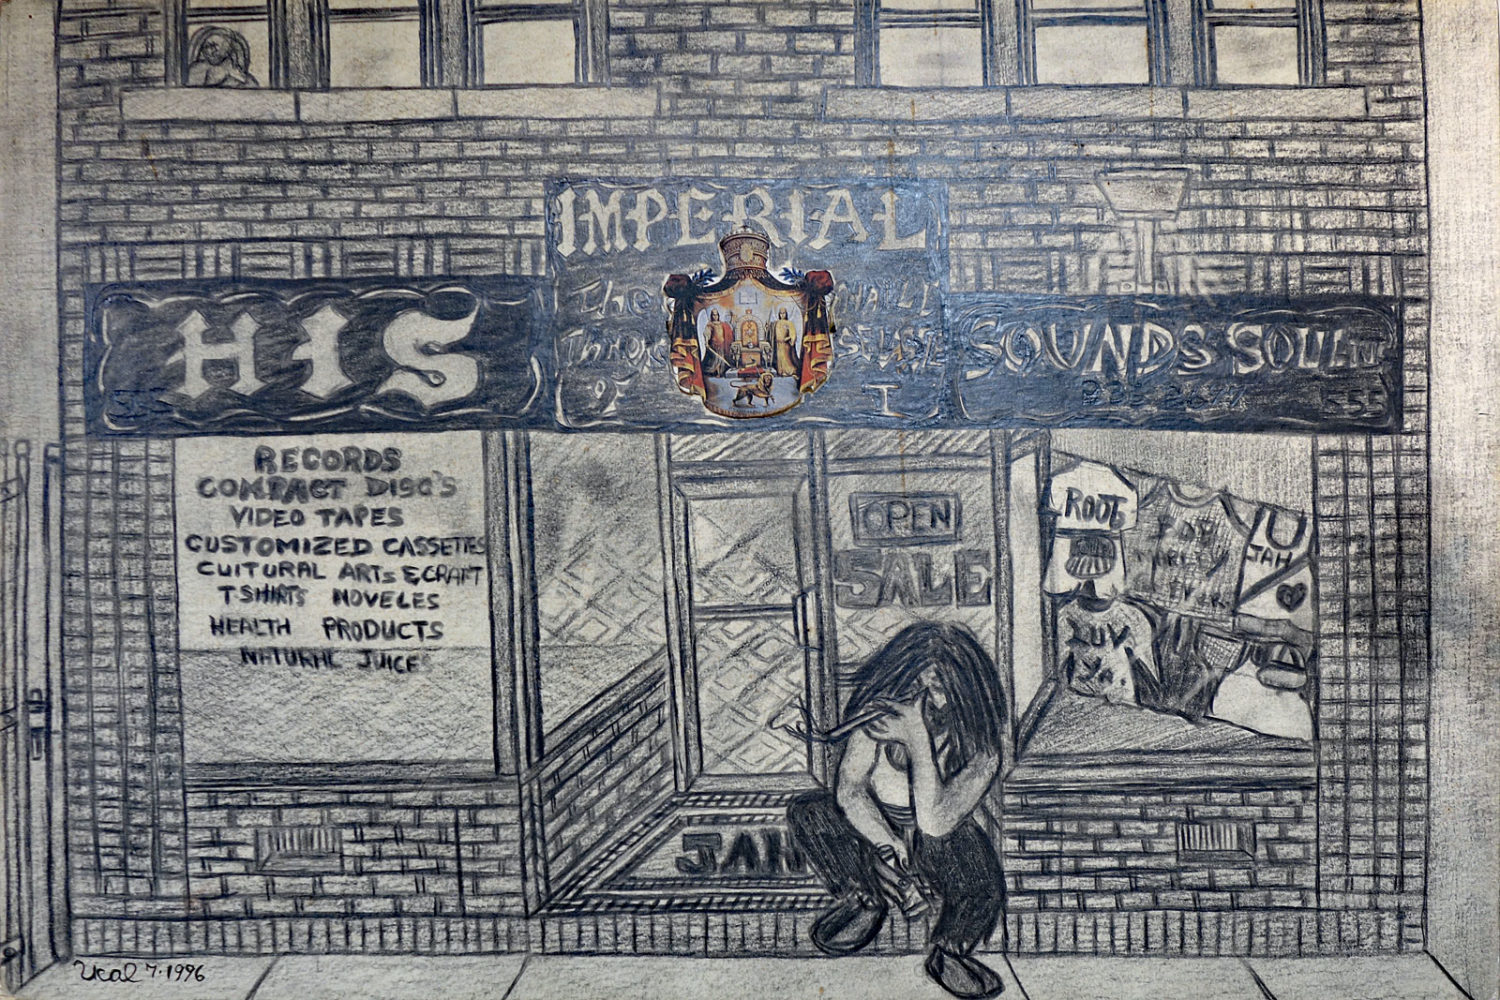 Ucal Bernard drawing of his brother-in-law's store on Chili Avenue in Rochester, New York